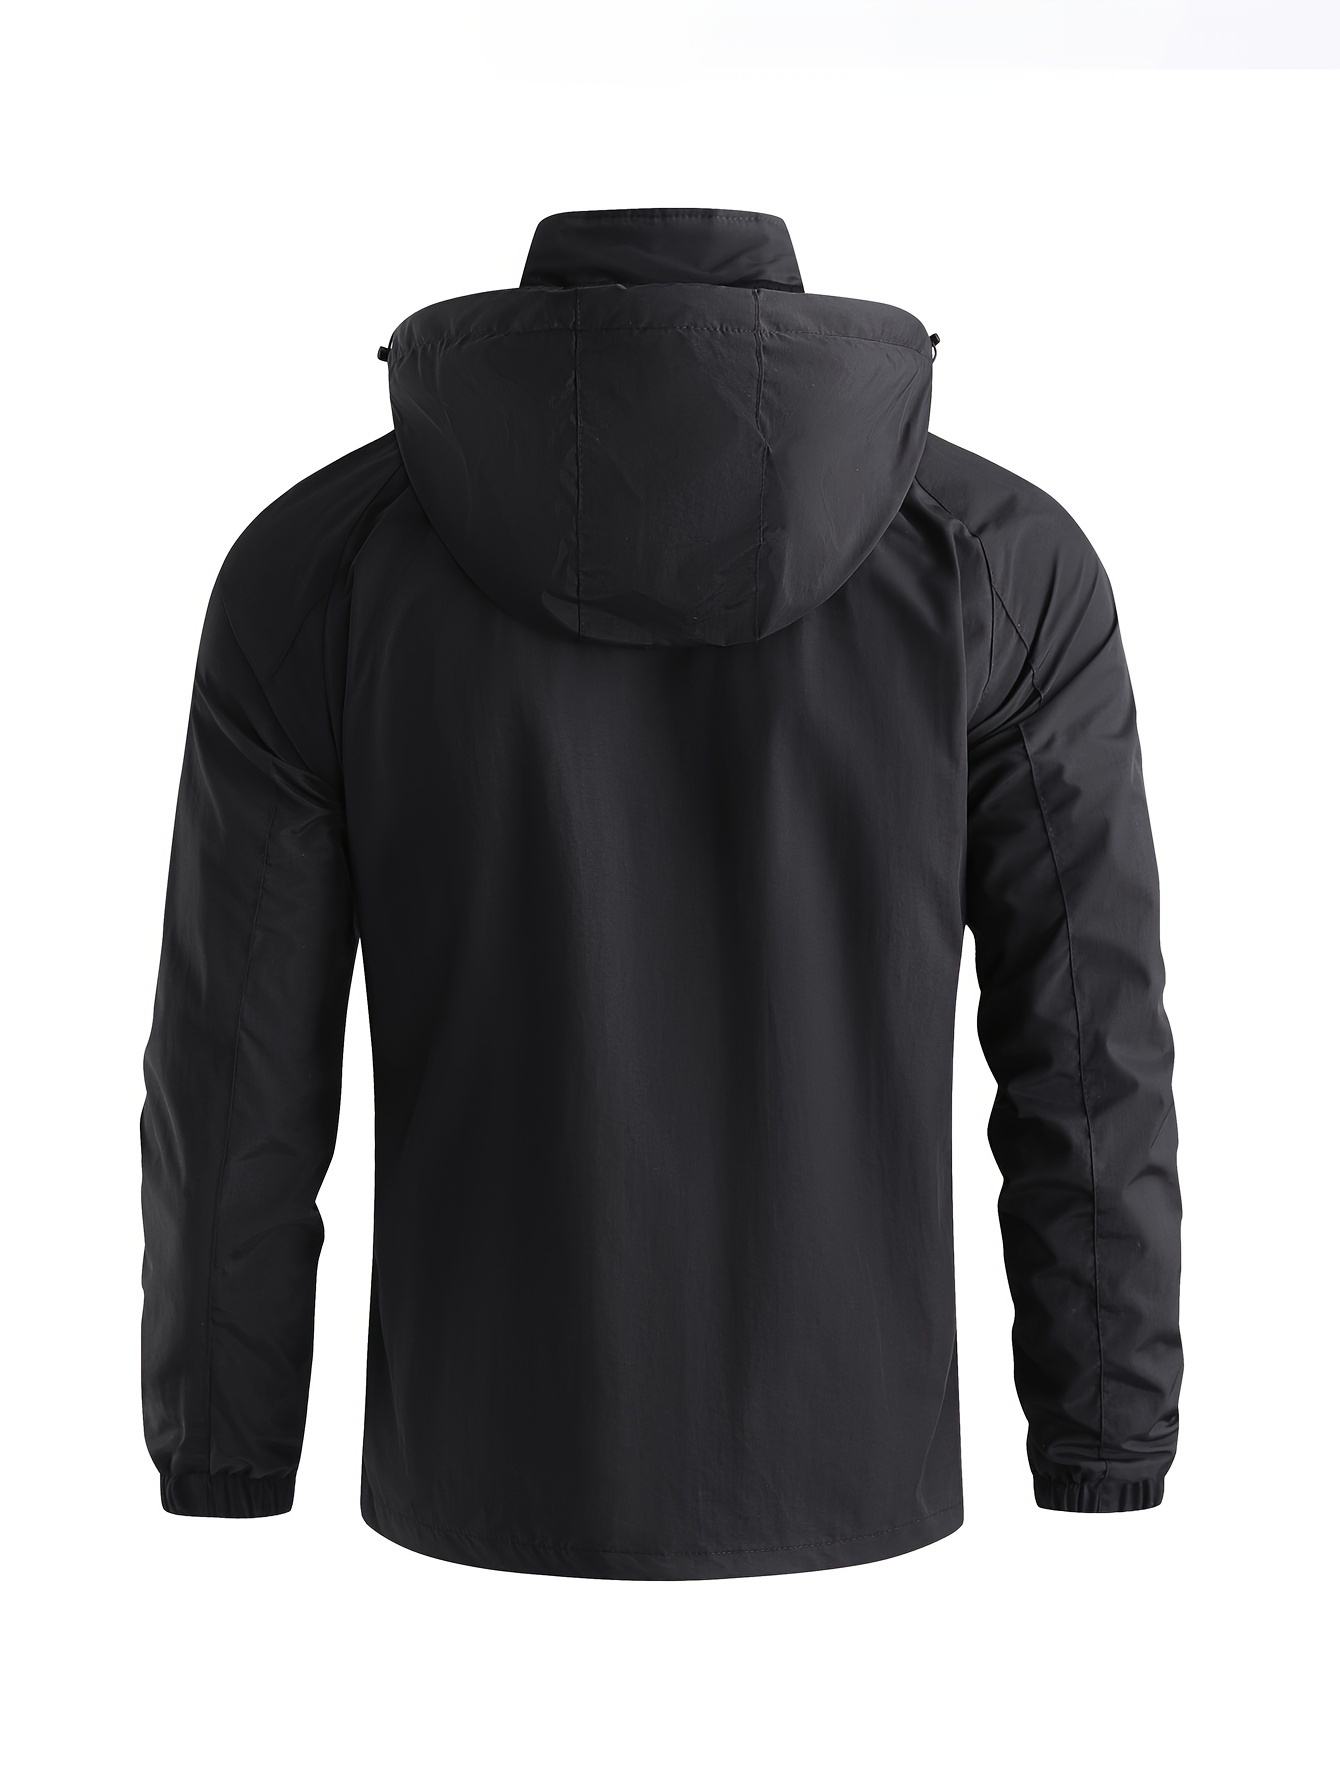 mens fall winter casual lightweight windbreaker hooded jacket with zipped pockets details 1